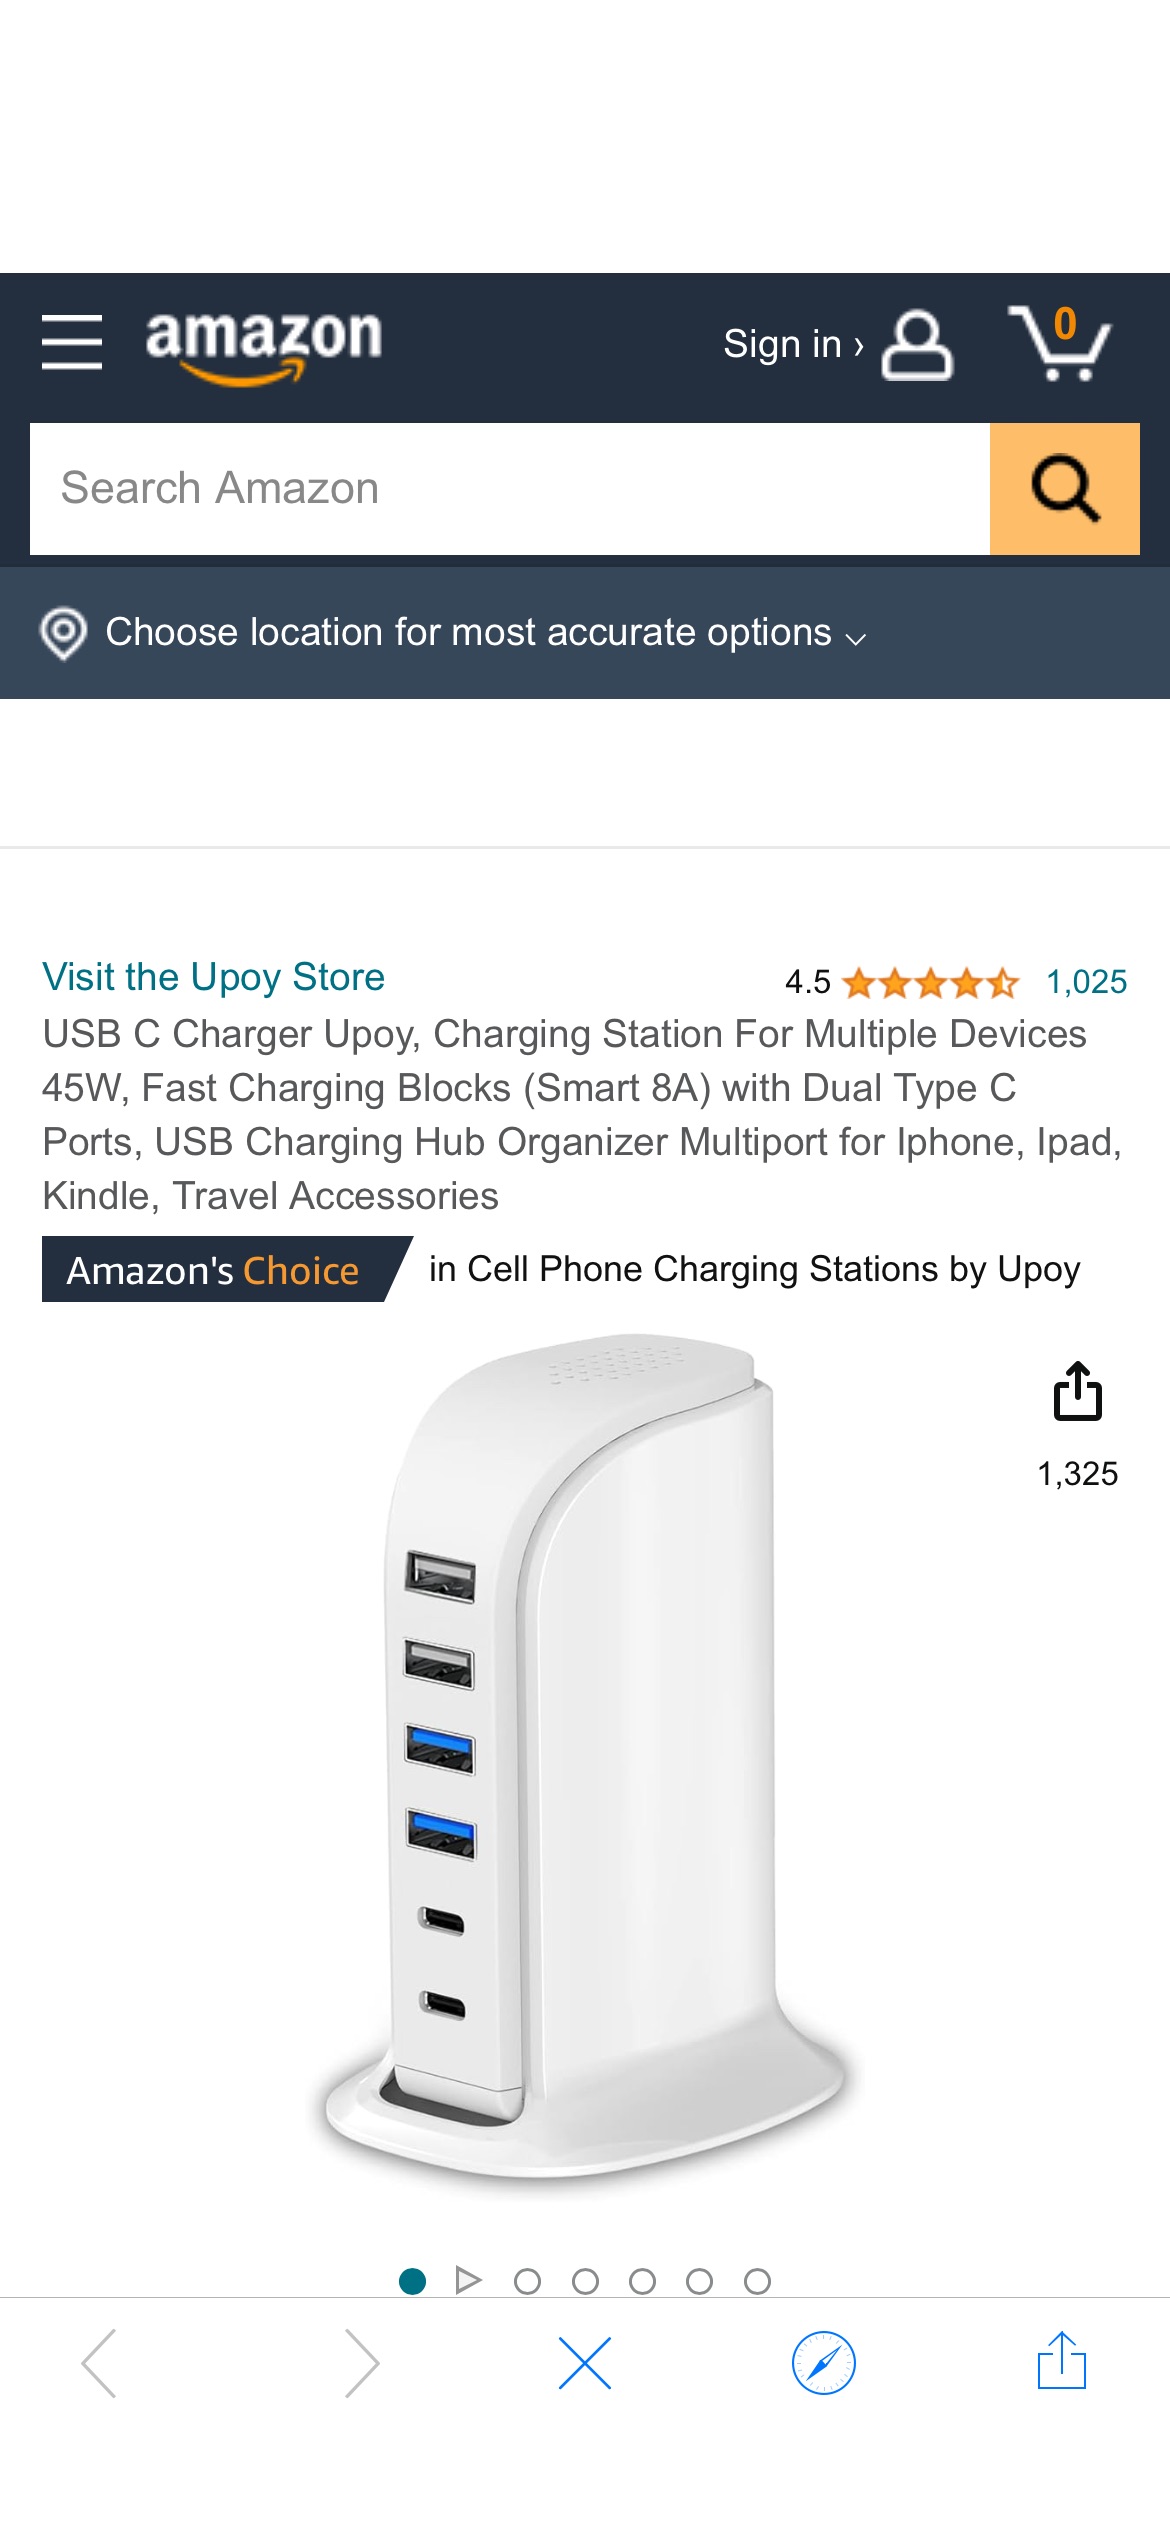 Amazon.com: USB C Charger Upoy, Charging Station For Multiple Devices 45W, Fast Charging Blocks (Smart 8A) with Dual Type C Ports, USB Charging Hub Organizer Multiport for Iphone, Ipad, Kindle, Travel